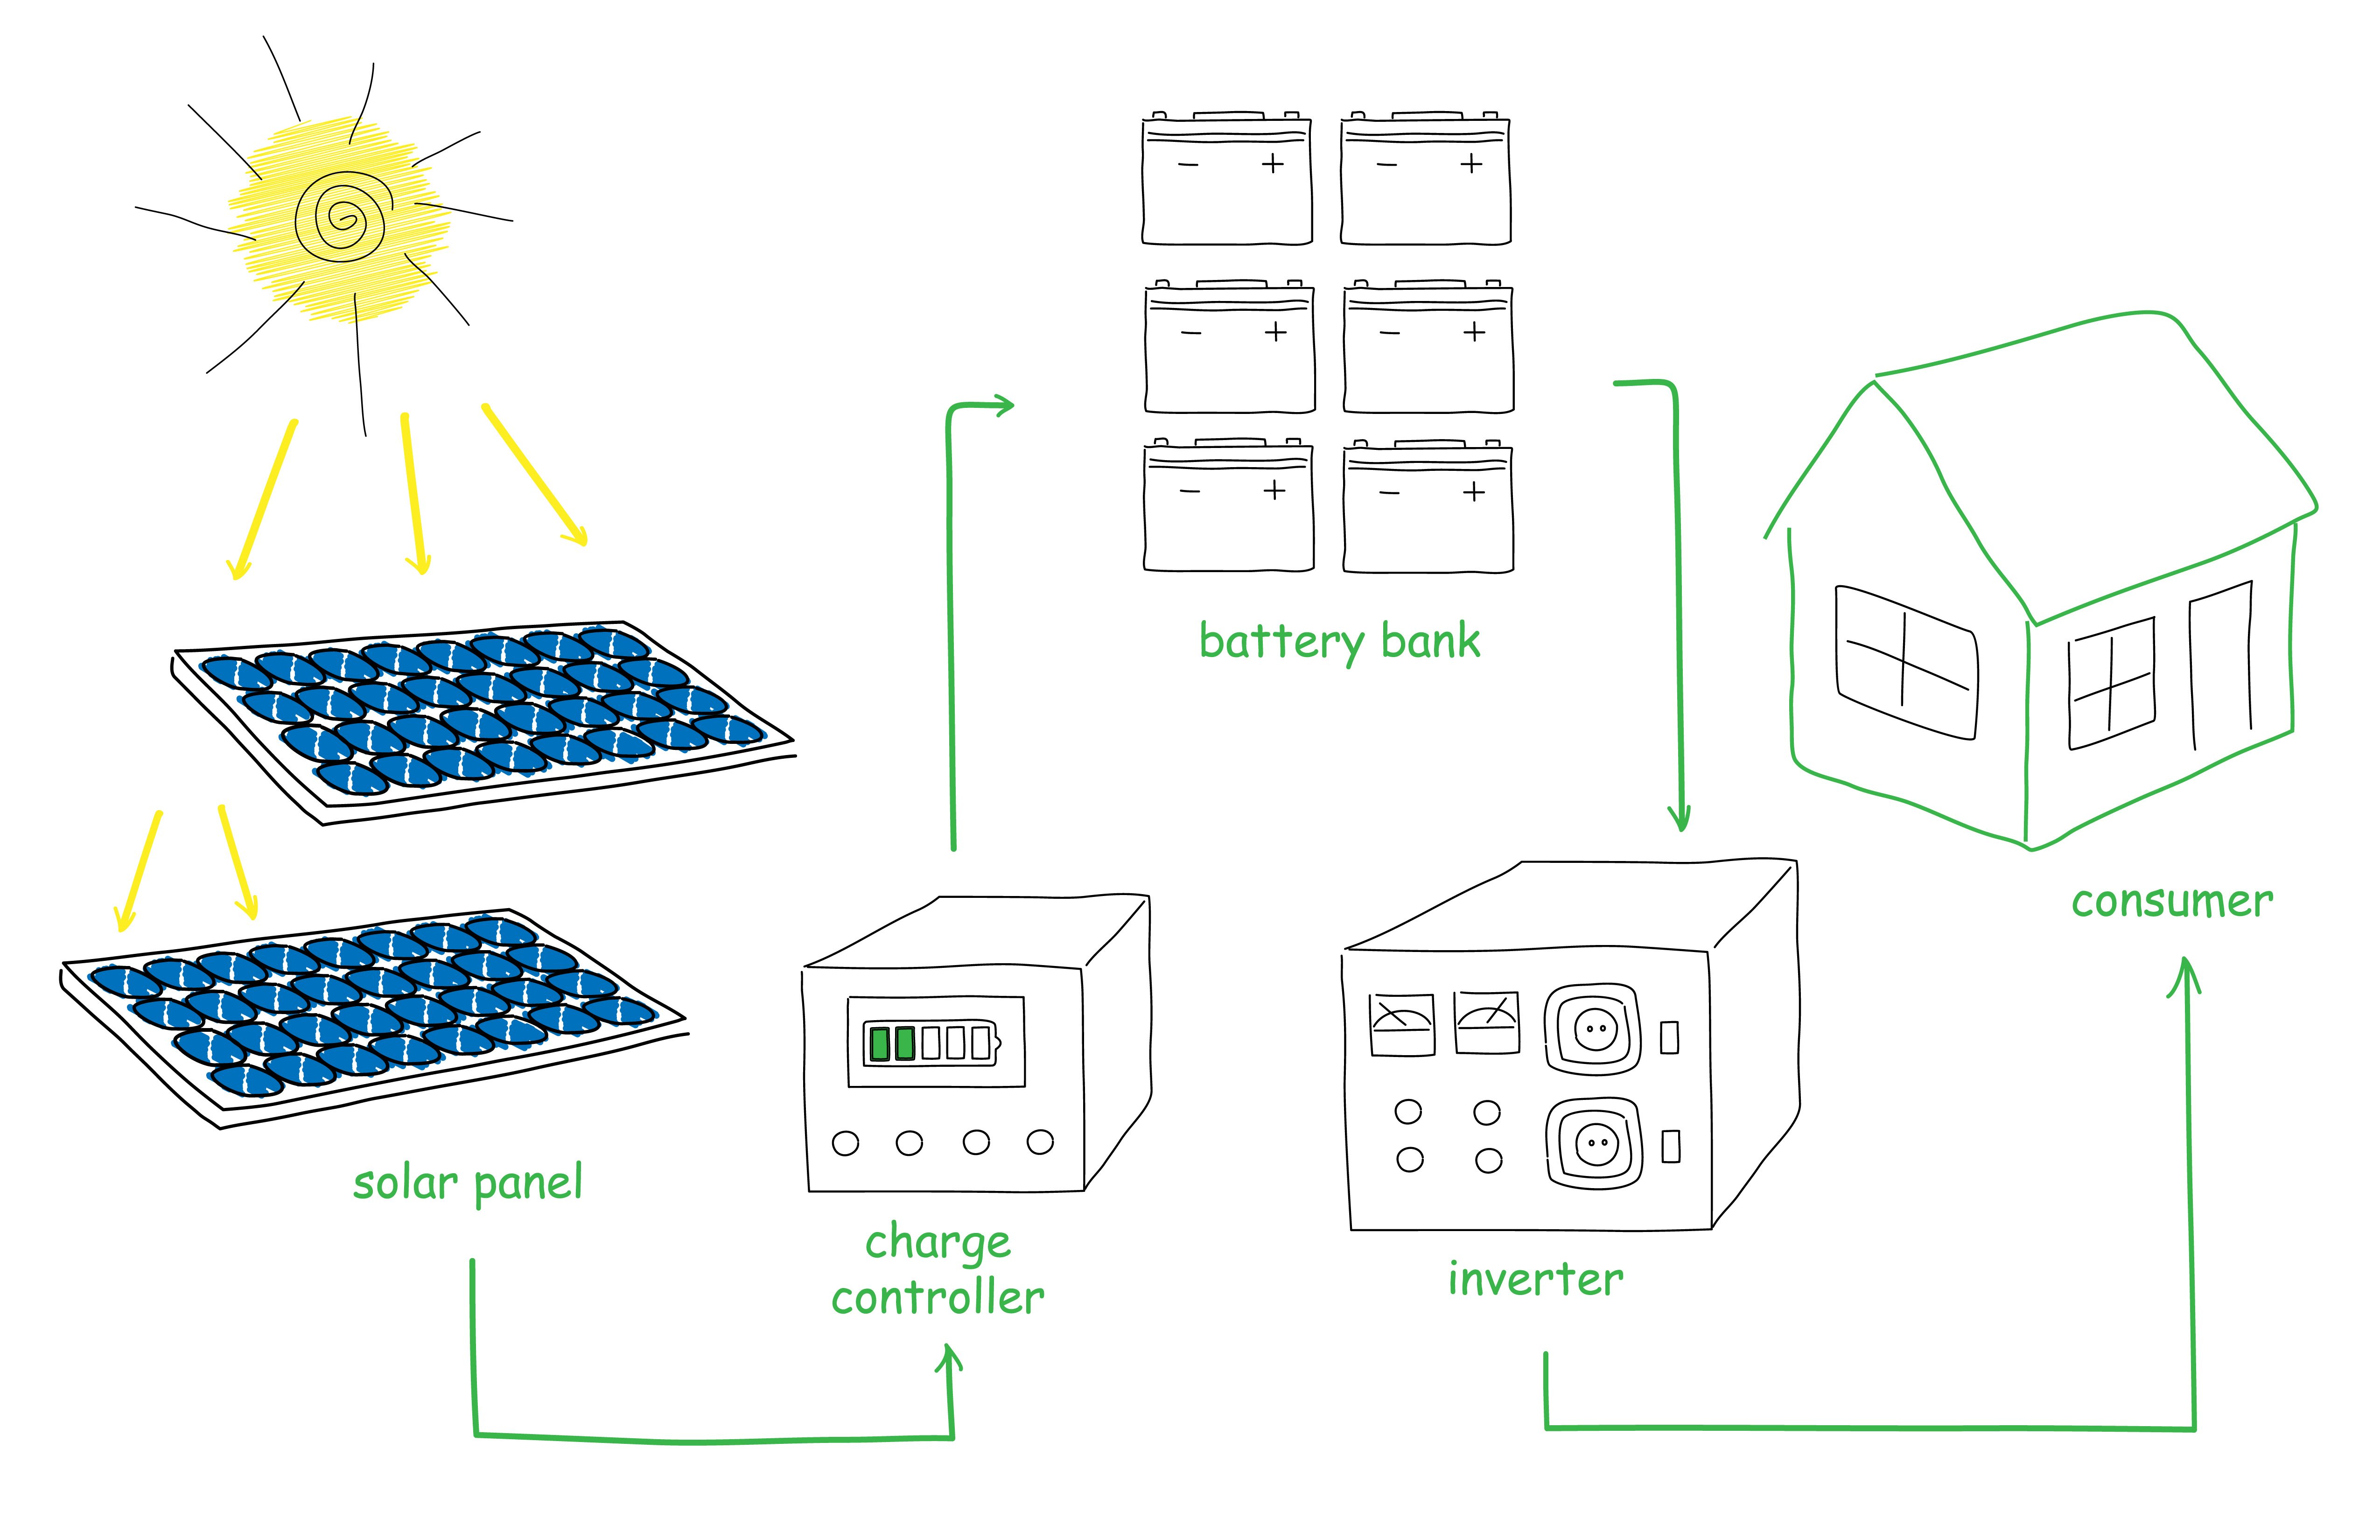 Figure 2. Charge controllers are typically installed between the solar panels and the battery bank. Source: C Design Studio/Adobe Stock